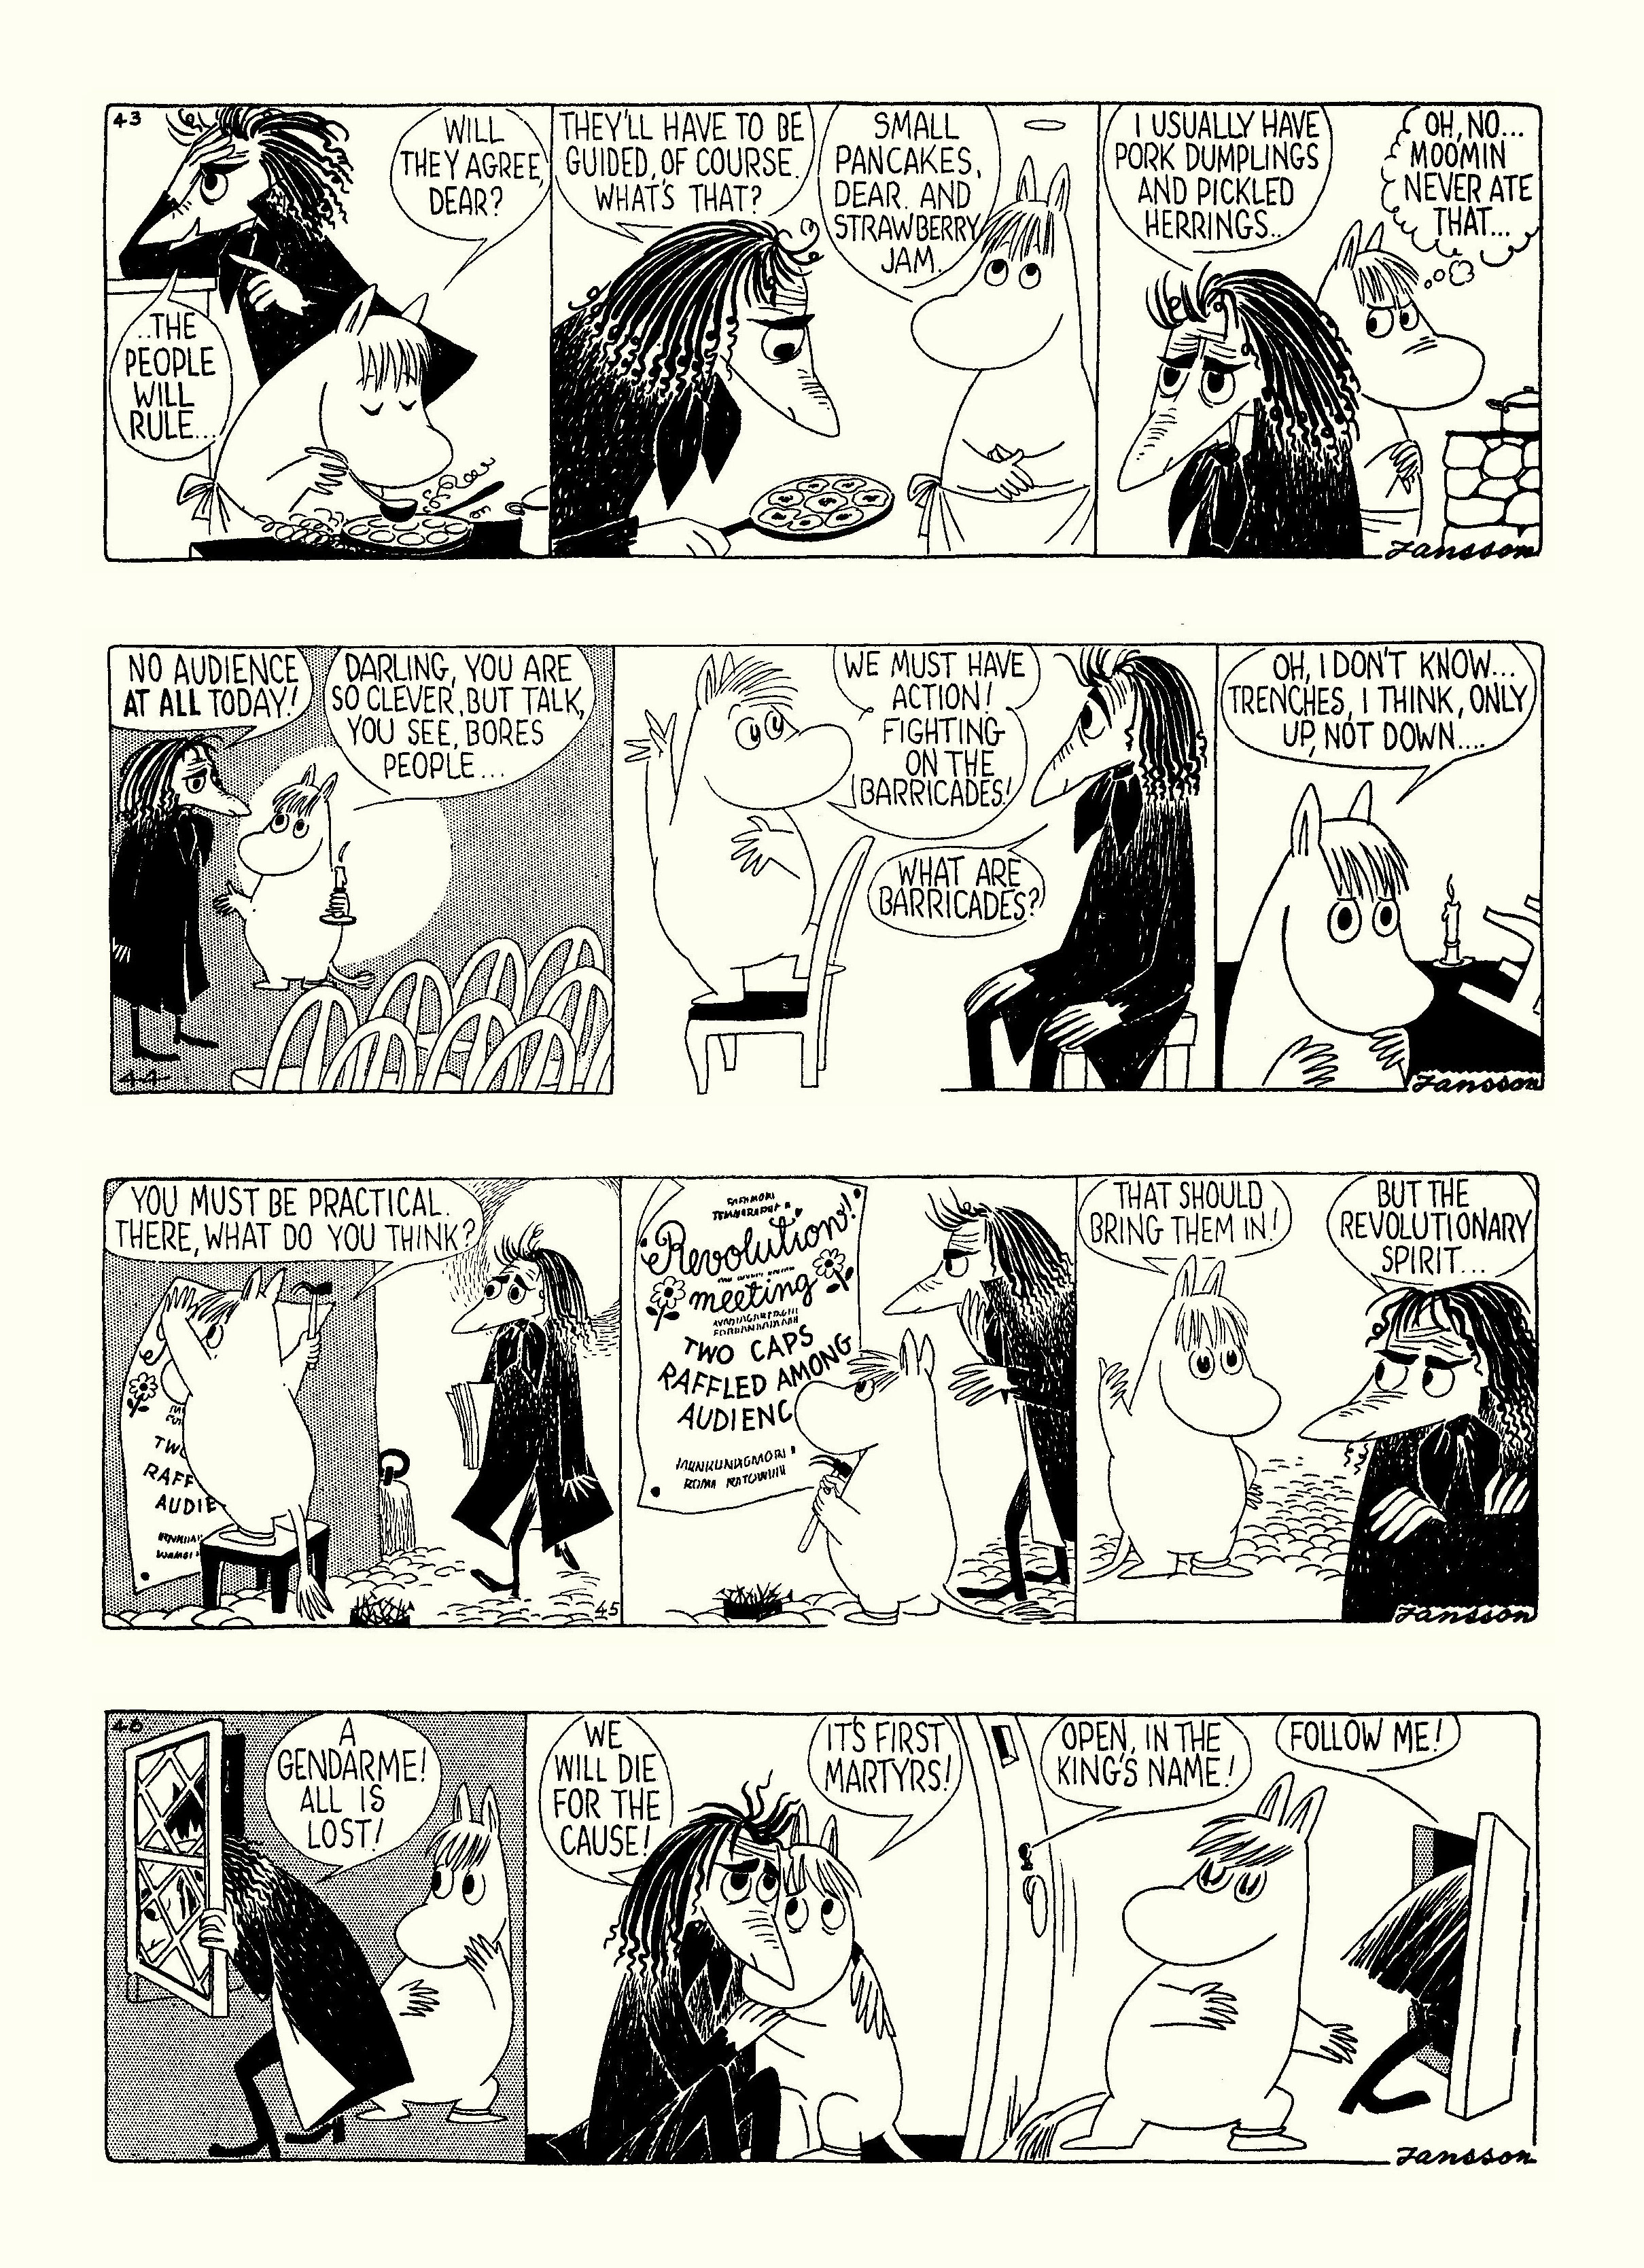 Read online Moomin: The Complete Tove Jansson Comic Strip comic -  Issue # TPB 4 - 34